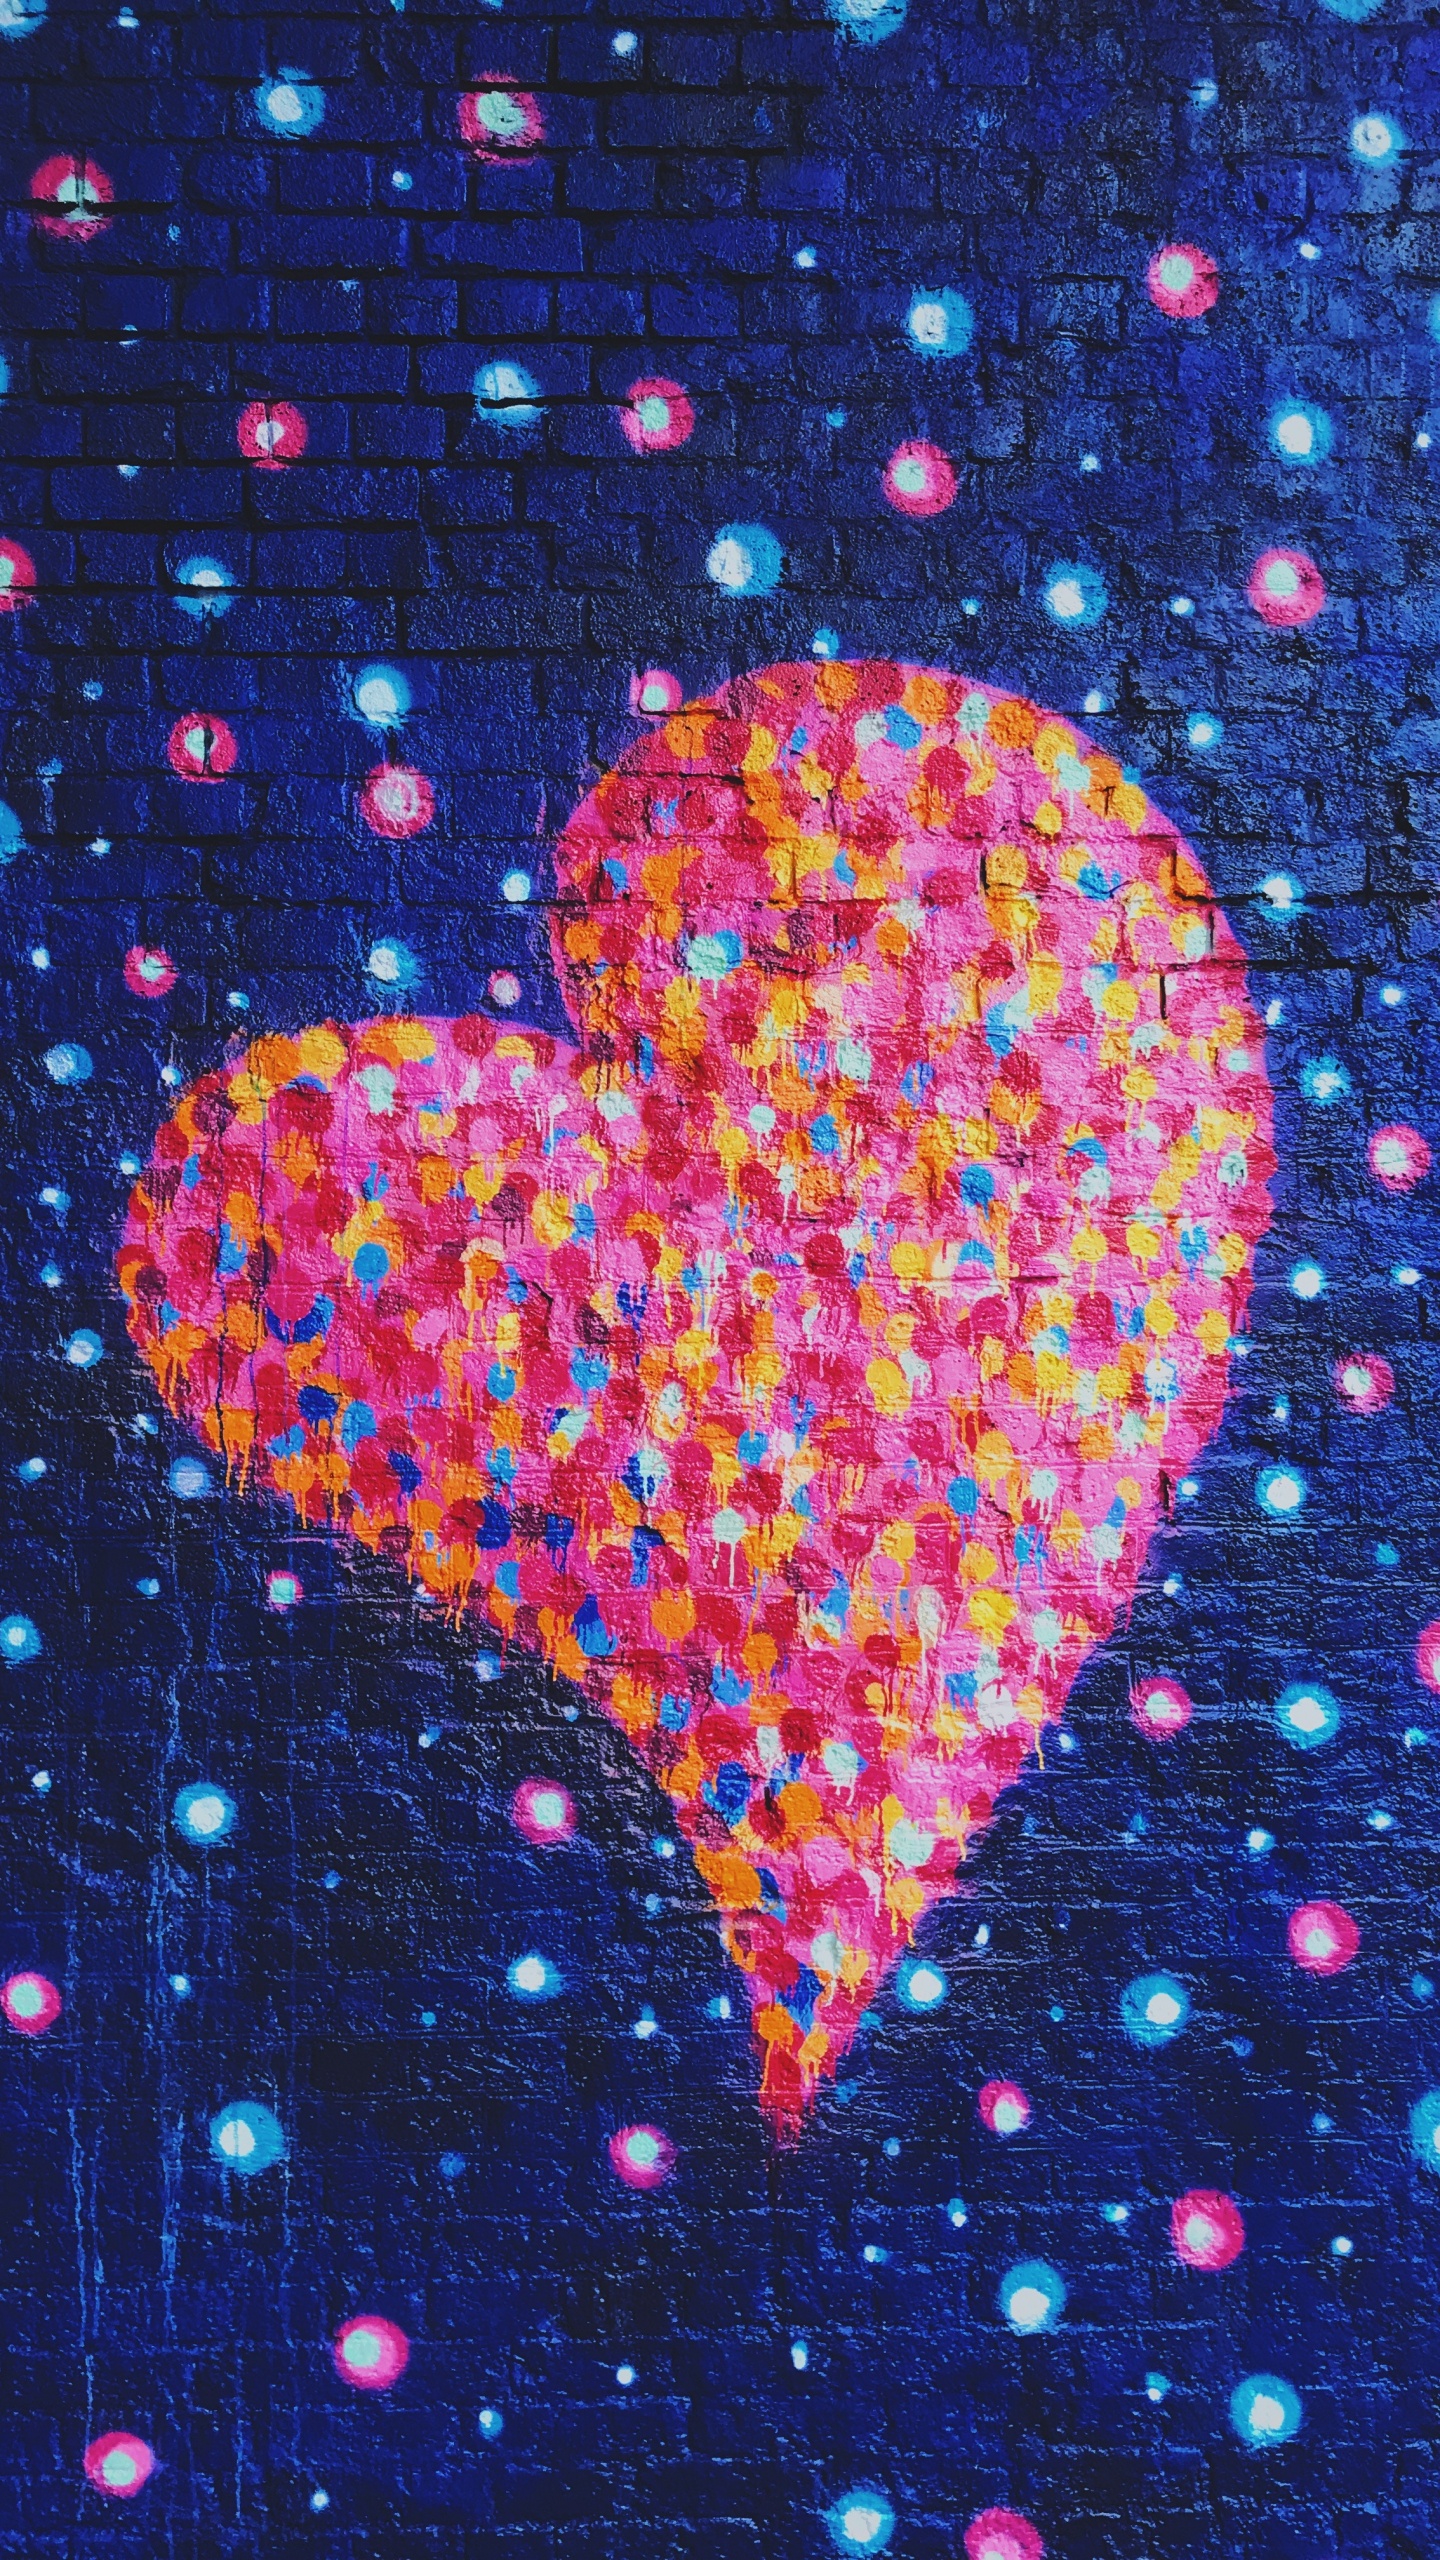 Red Heart With Blue and Pink Hearts Illustration. Wallpaper in 1440x2560 Resolution